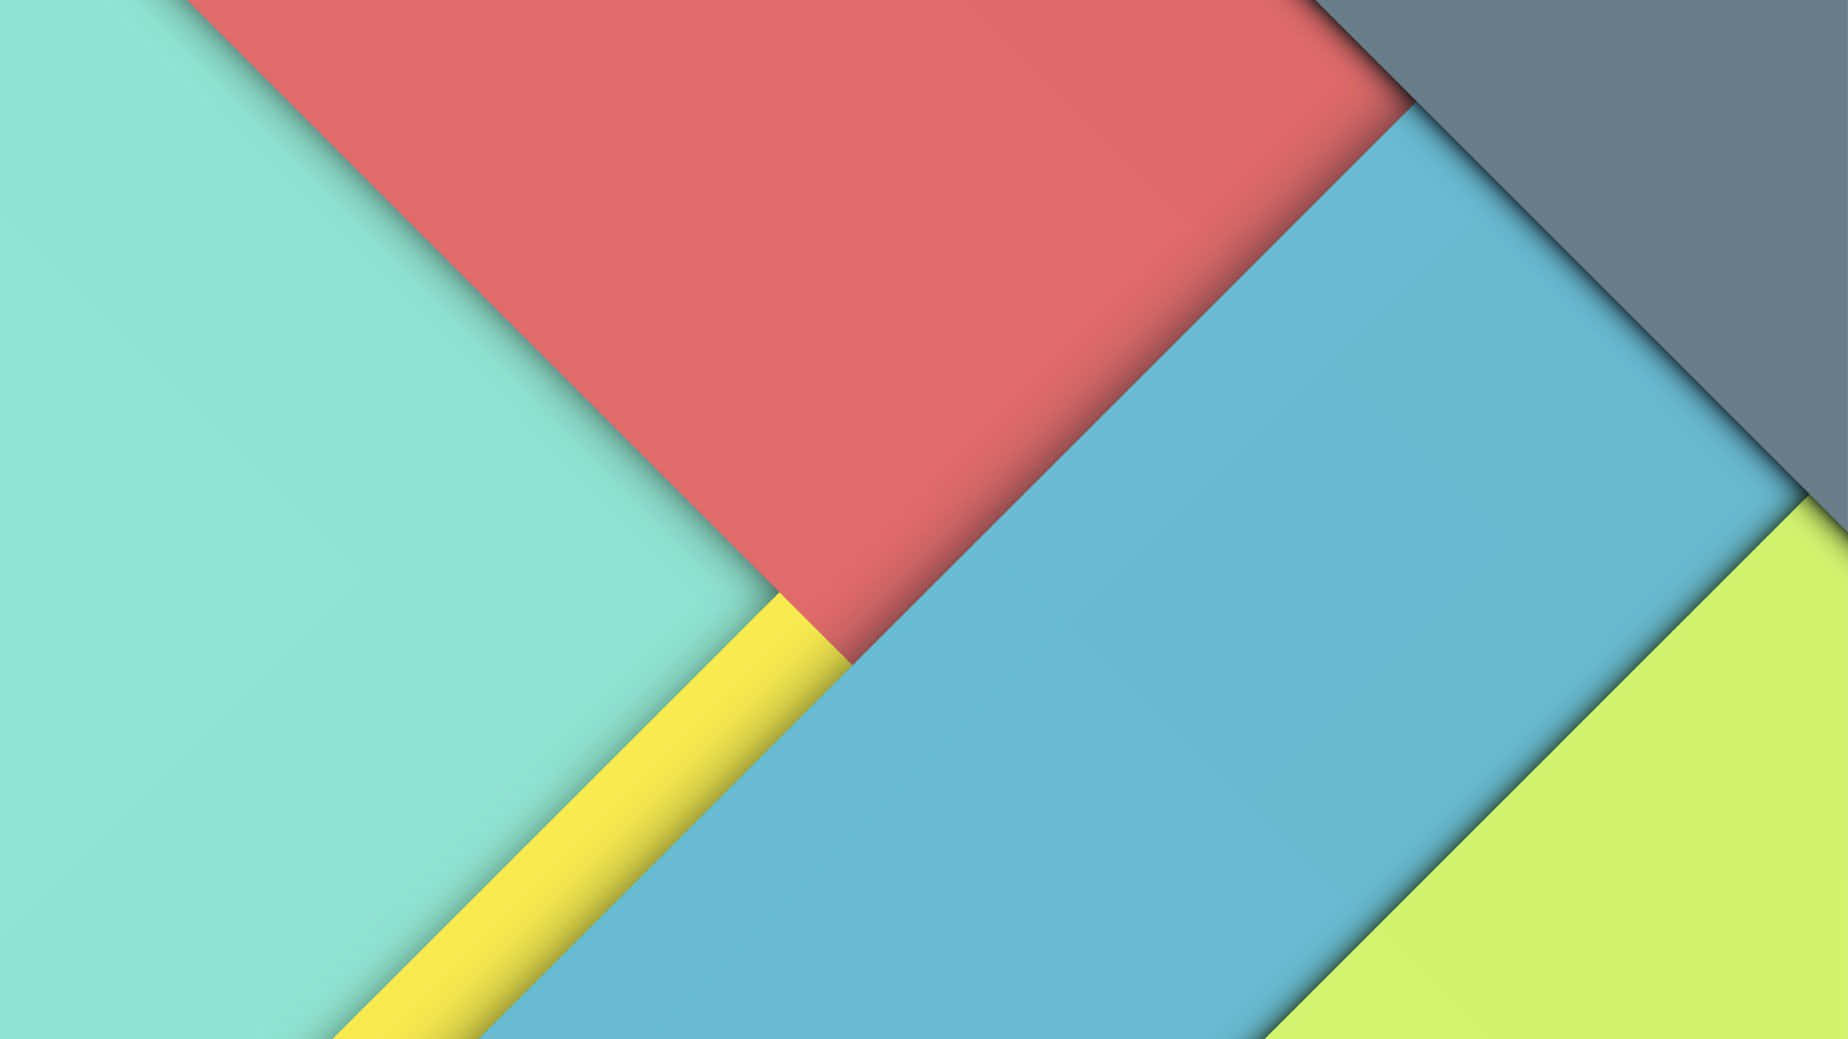 "Experience Crisp, Clean Design with Google's Material Design"